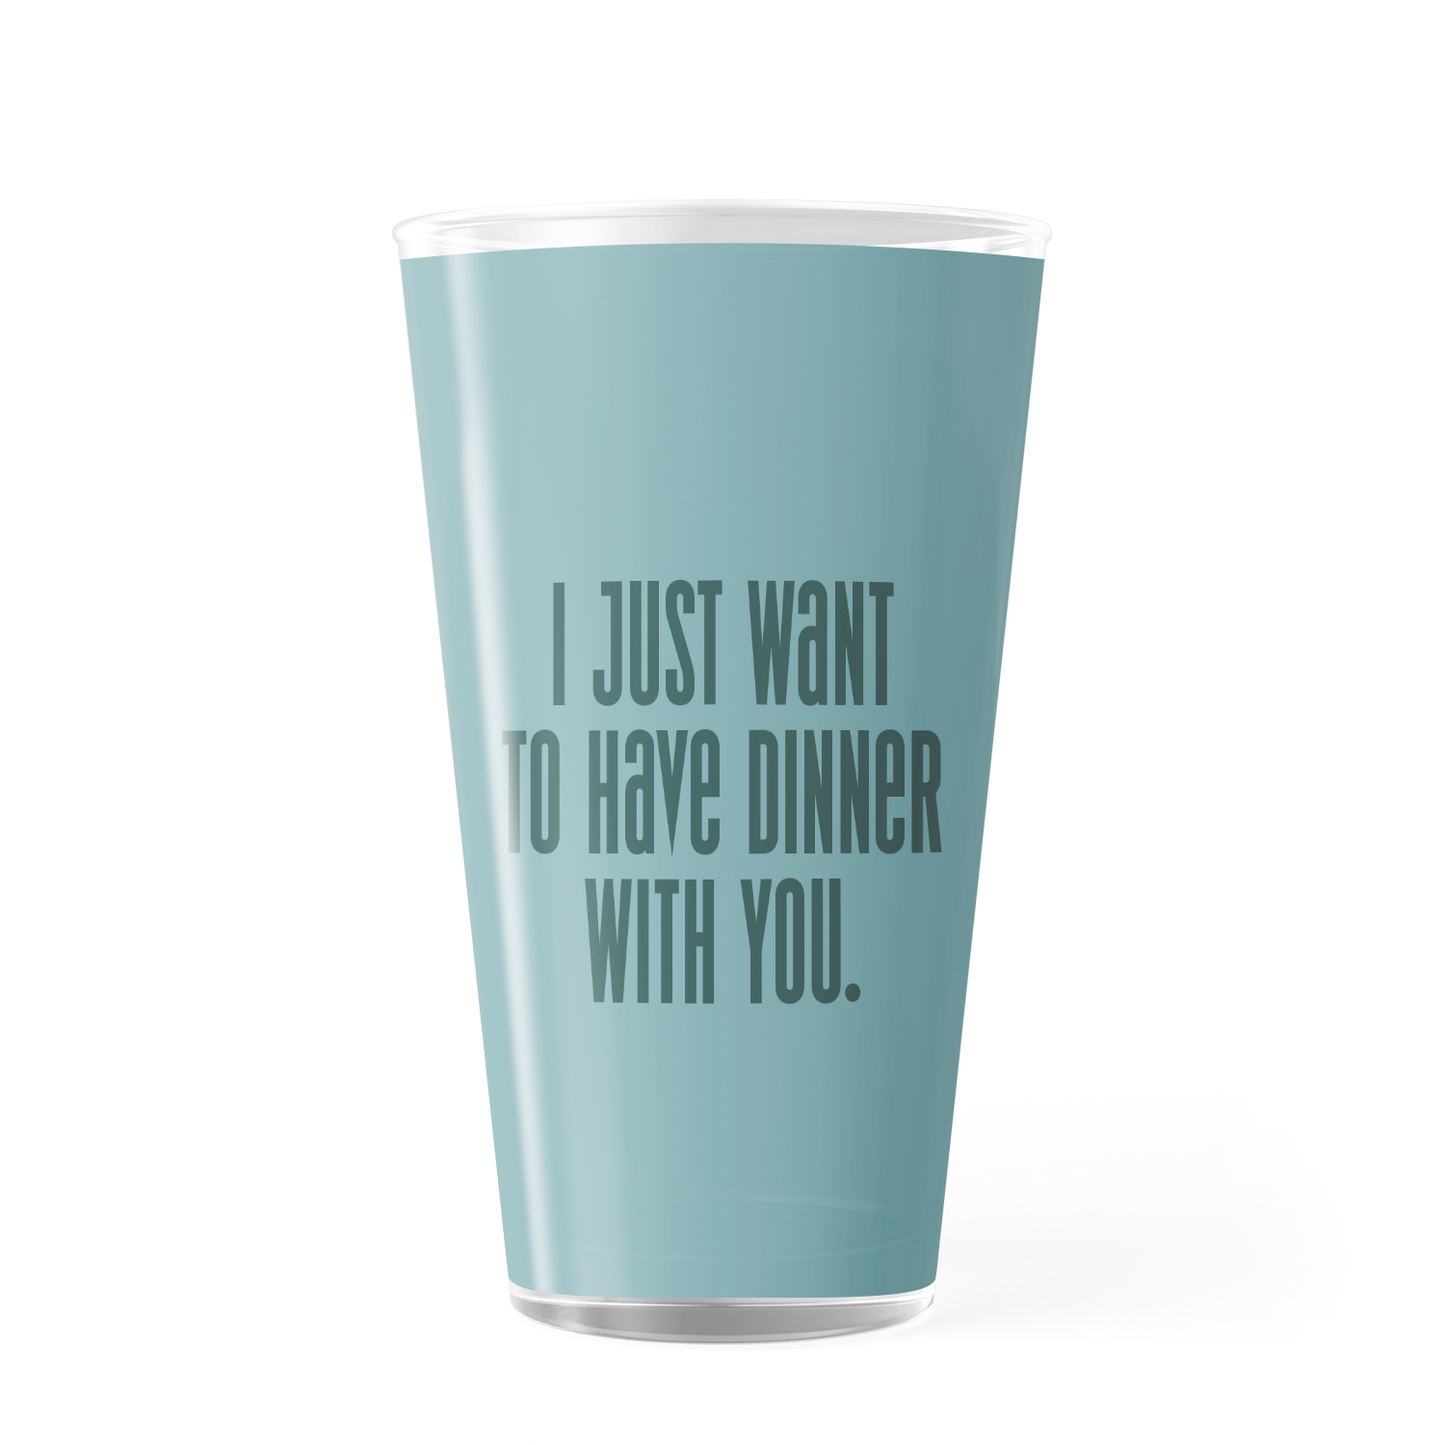 Killing Eve Dinner With You 17 oz Pint Glass